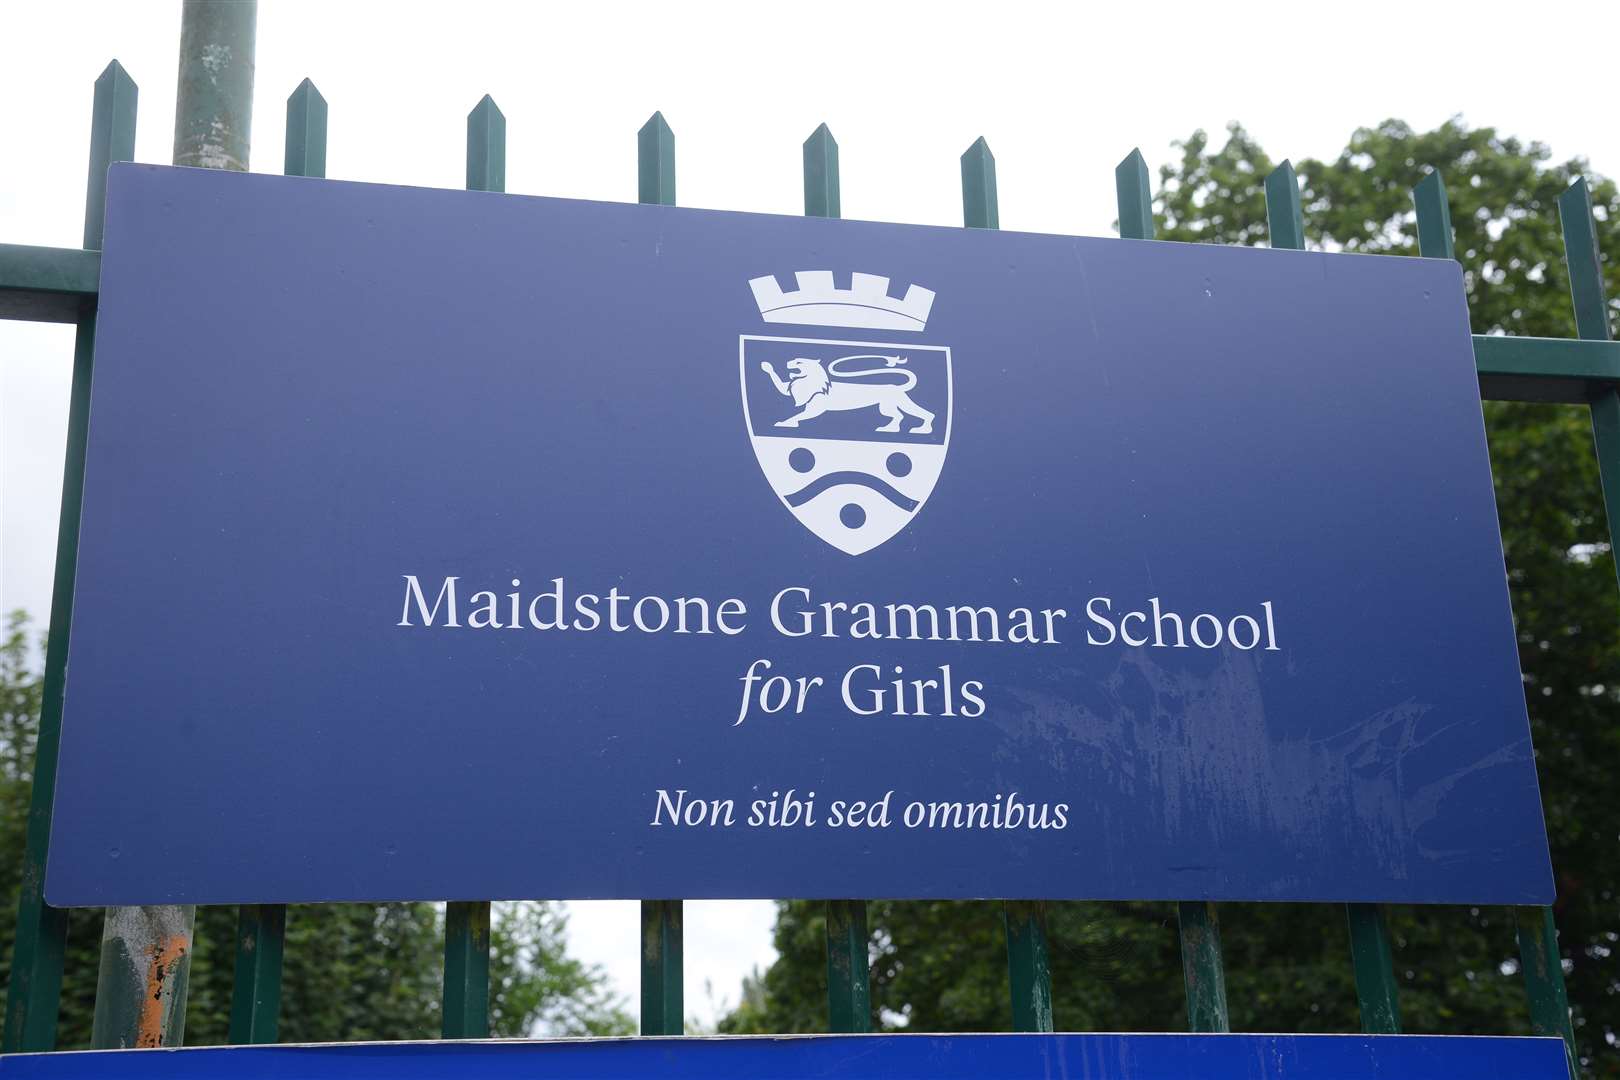 Maidstone Grammar School for Girls pupils had their prom cancelled